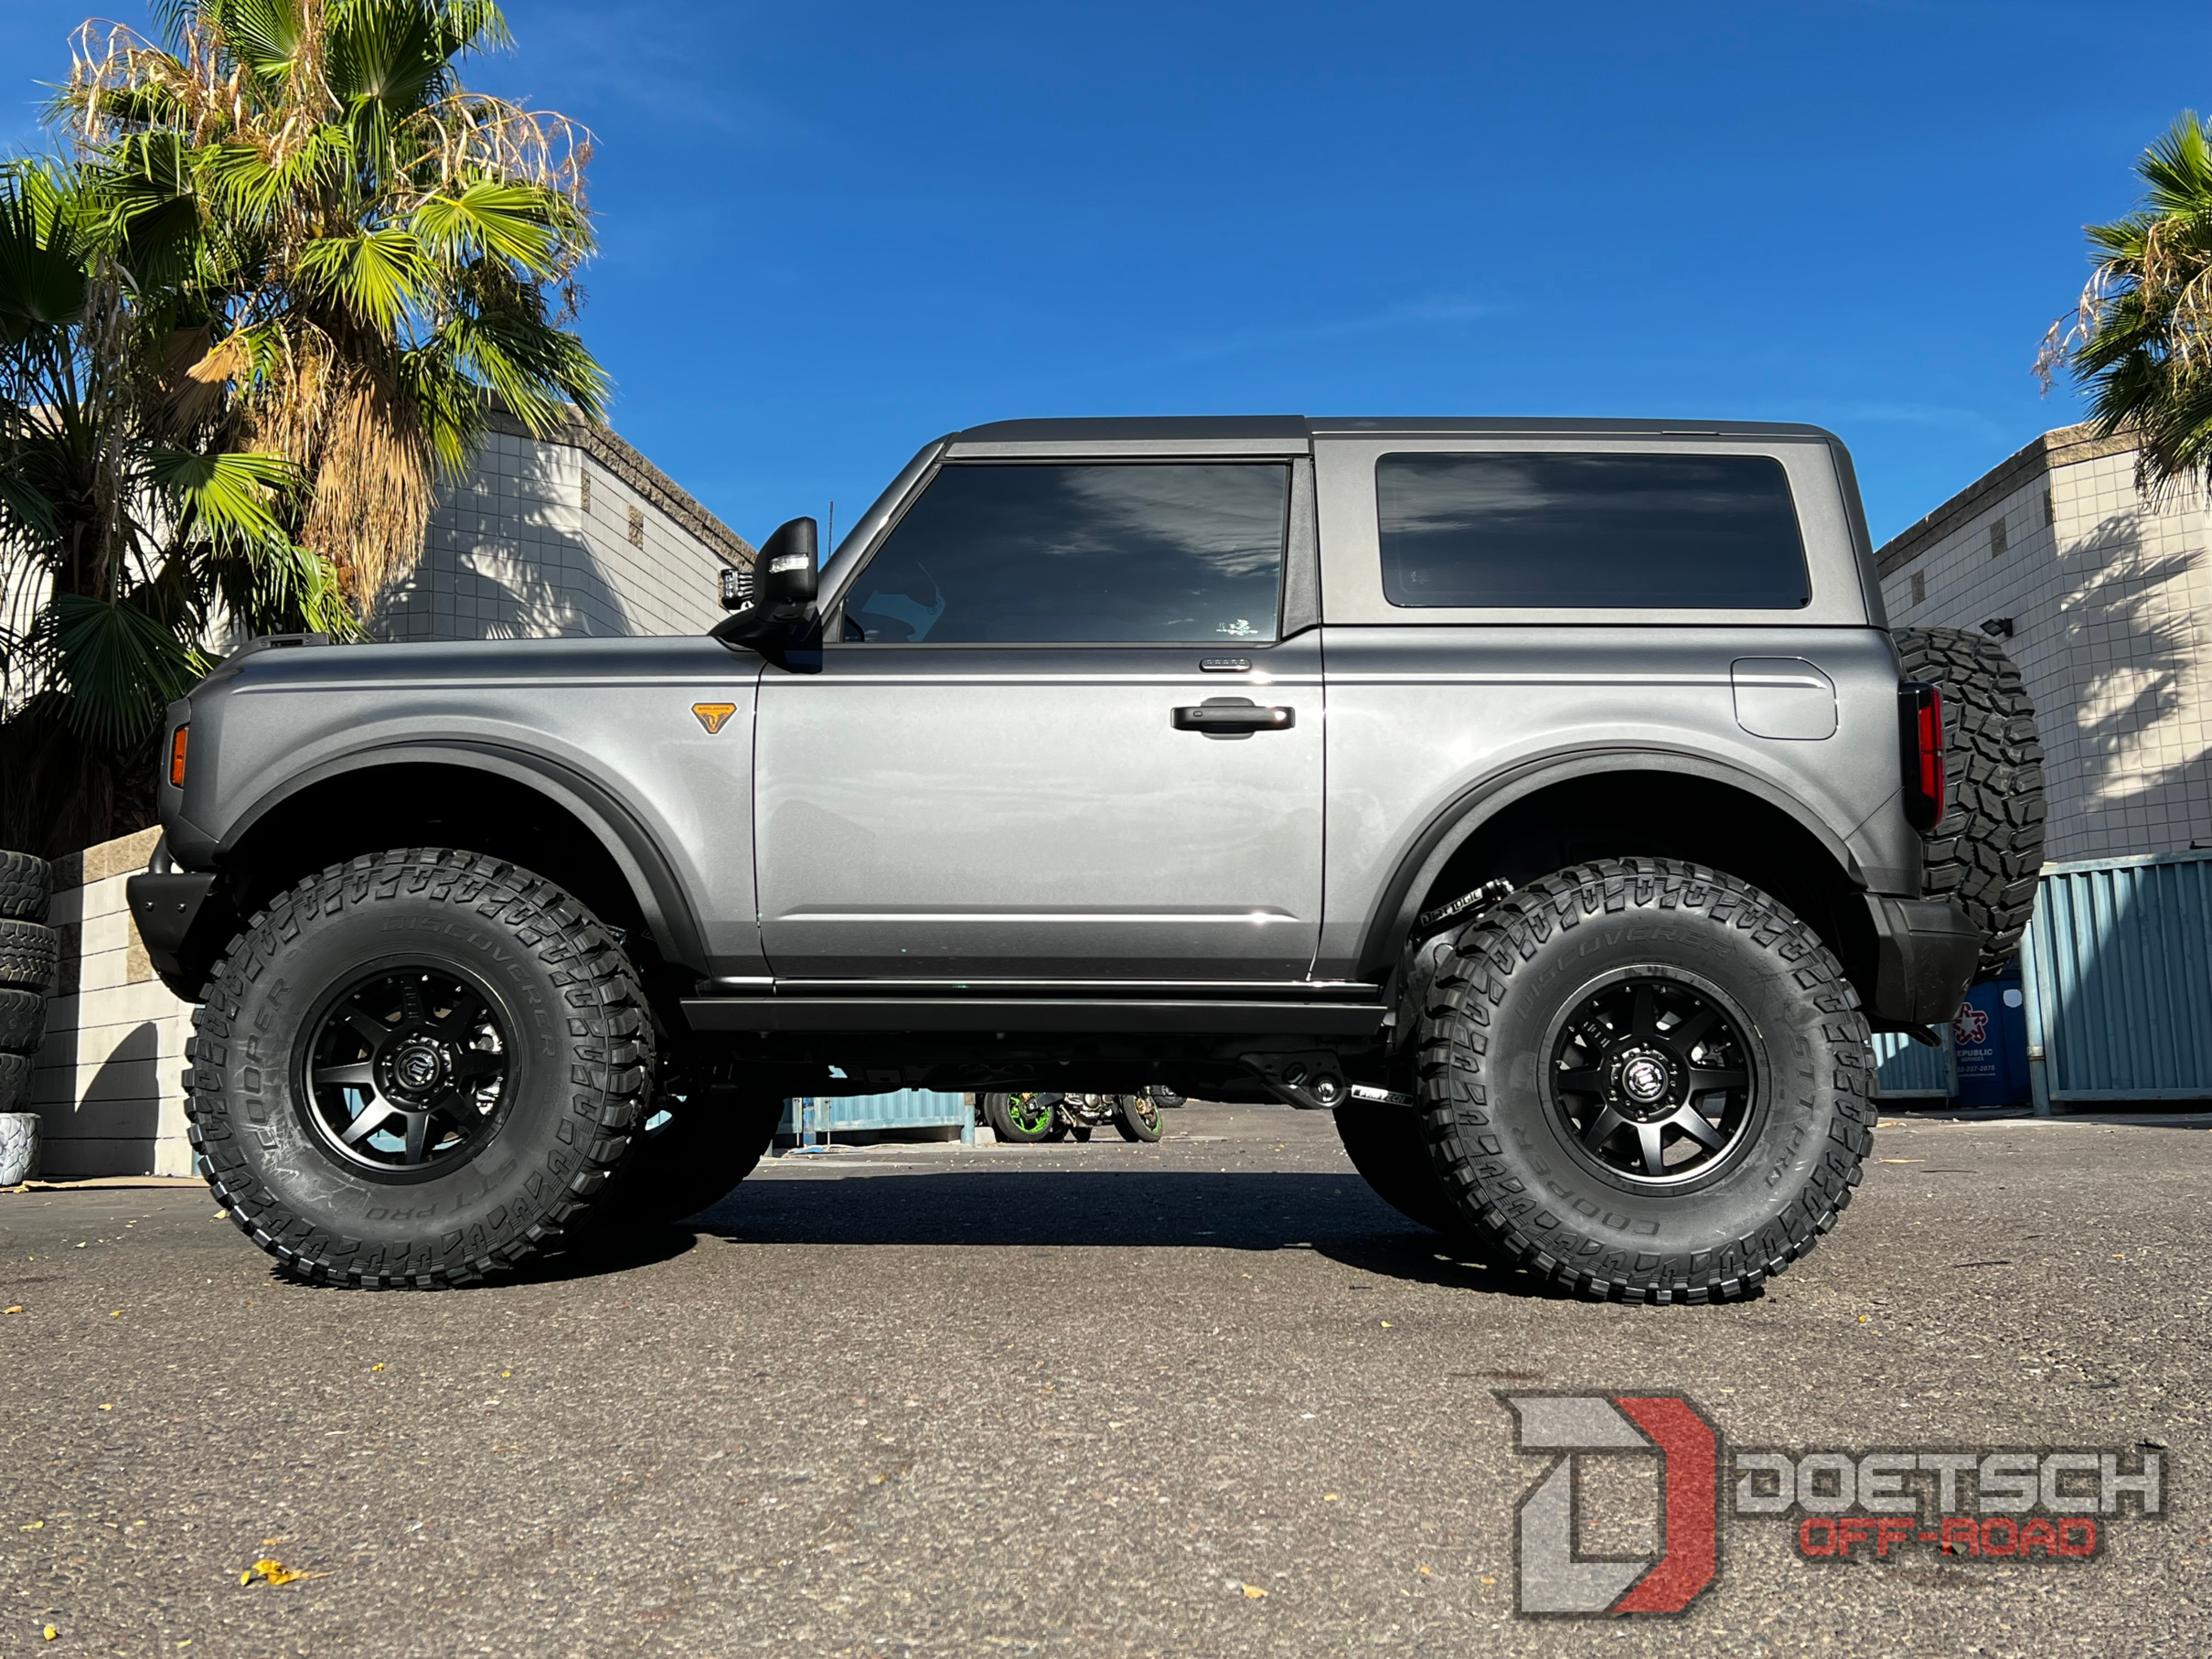 Ford Bronco Brians Carbonized 3" Fabtech Full 2 door build - by Doetsch Off-Road. Doetsch Off-Road3618 (37)